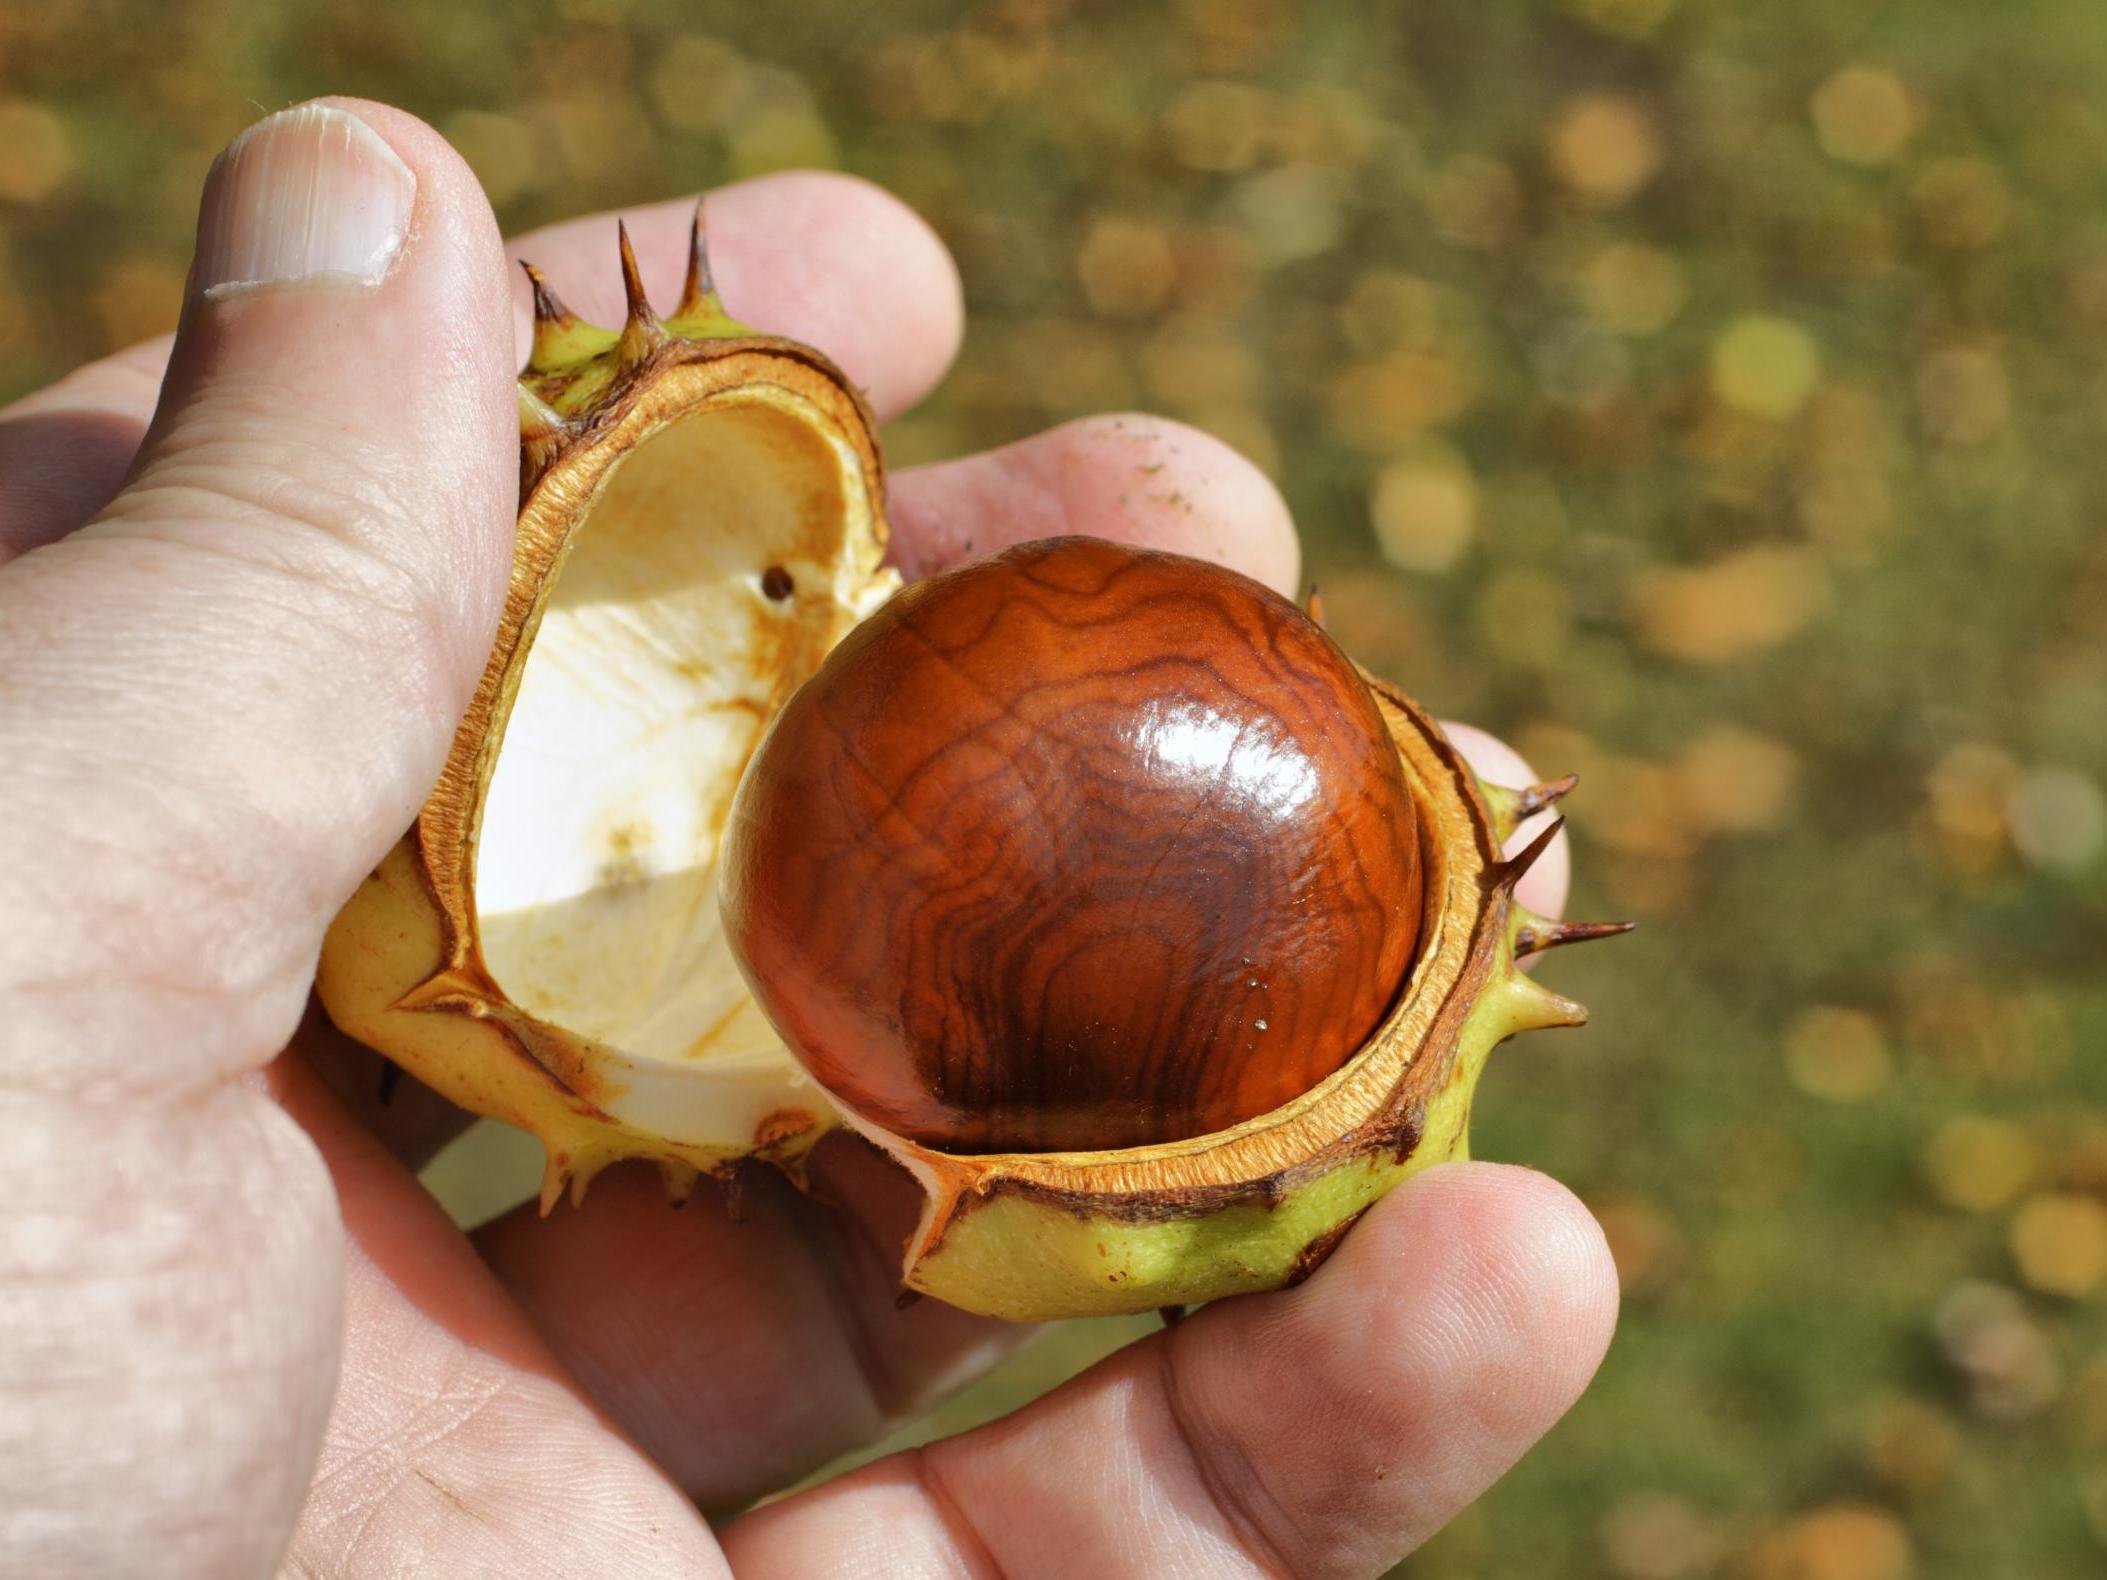 All-conquering: Soak them in water and conkers become a sustainable cleaning product